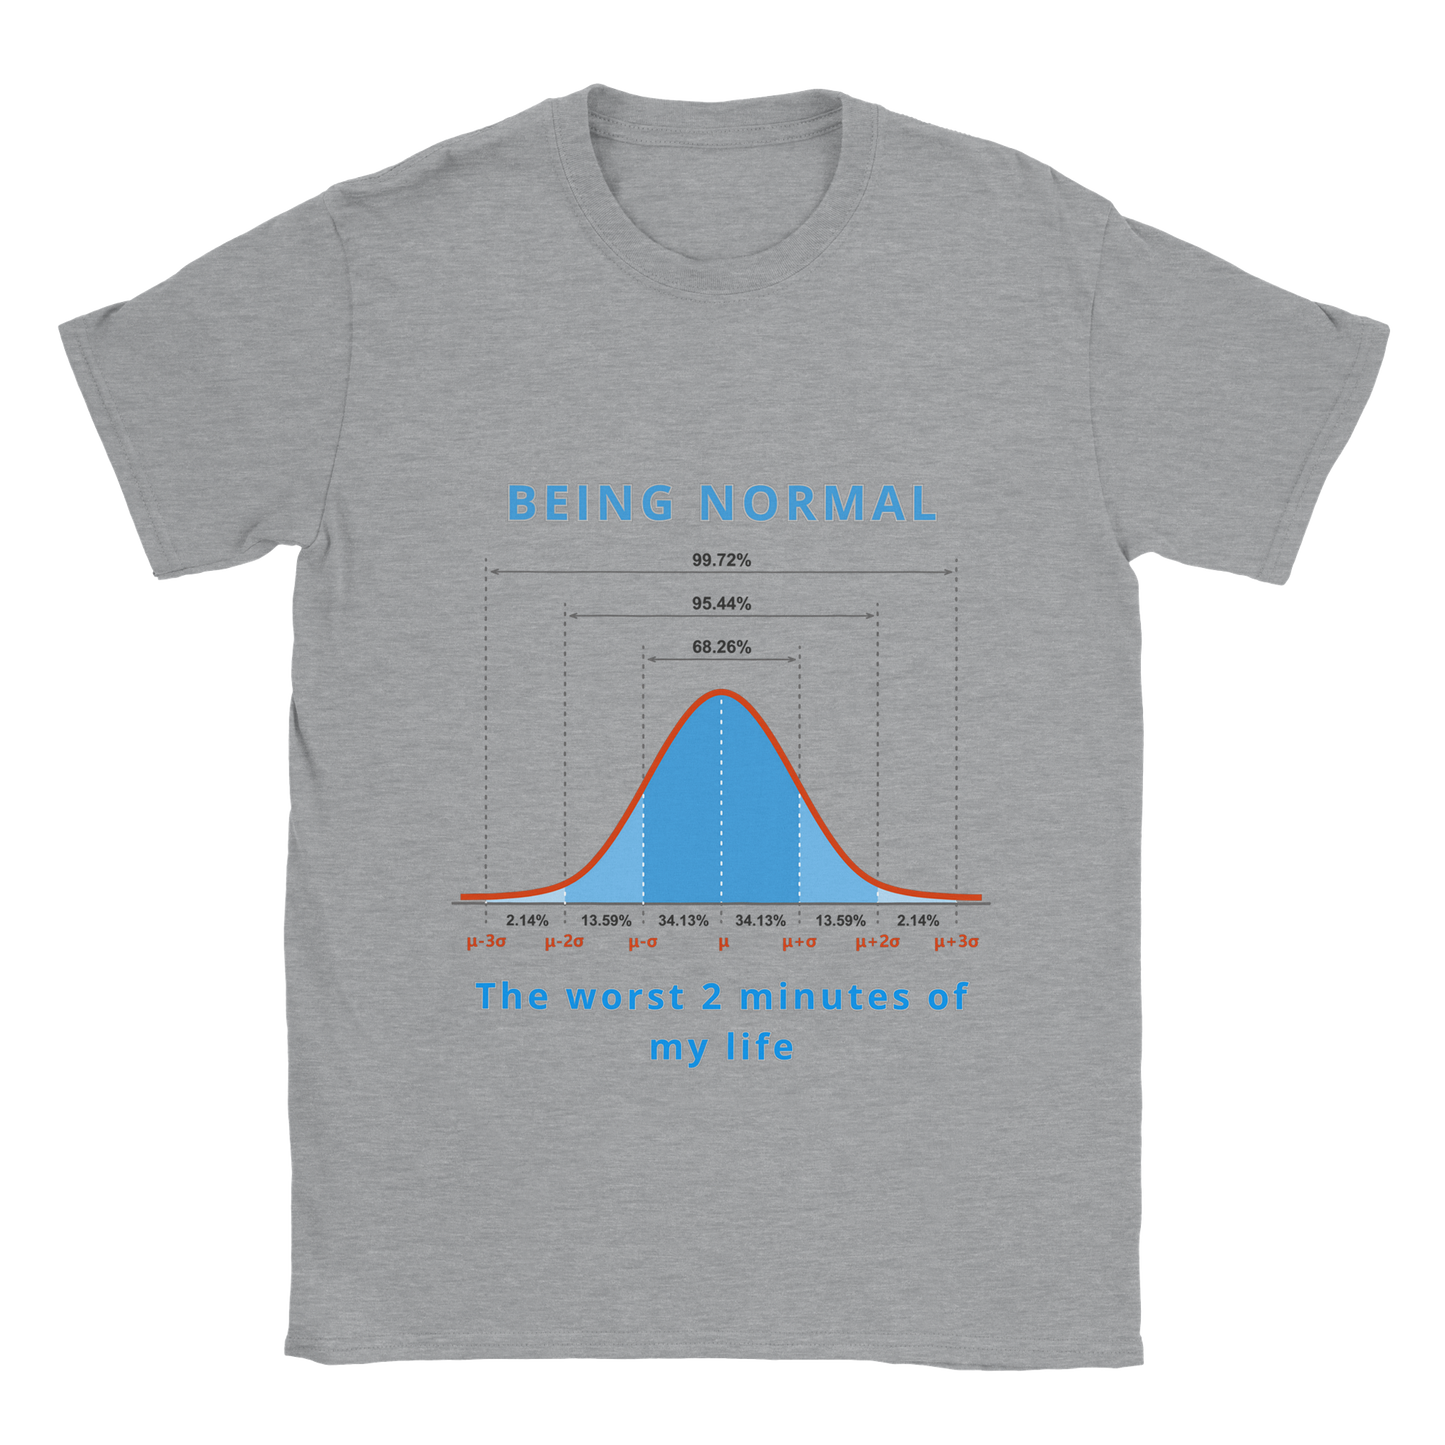 Being Normal Funny Mens Shirt